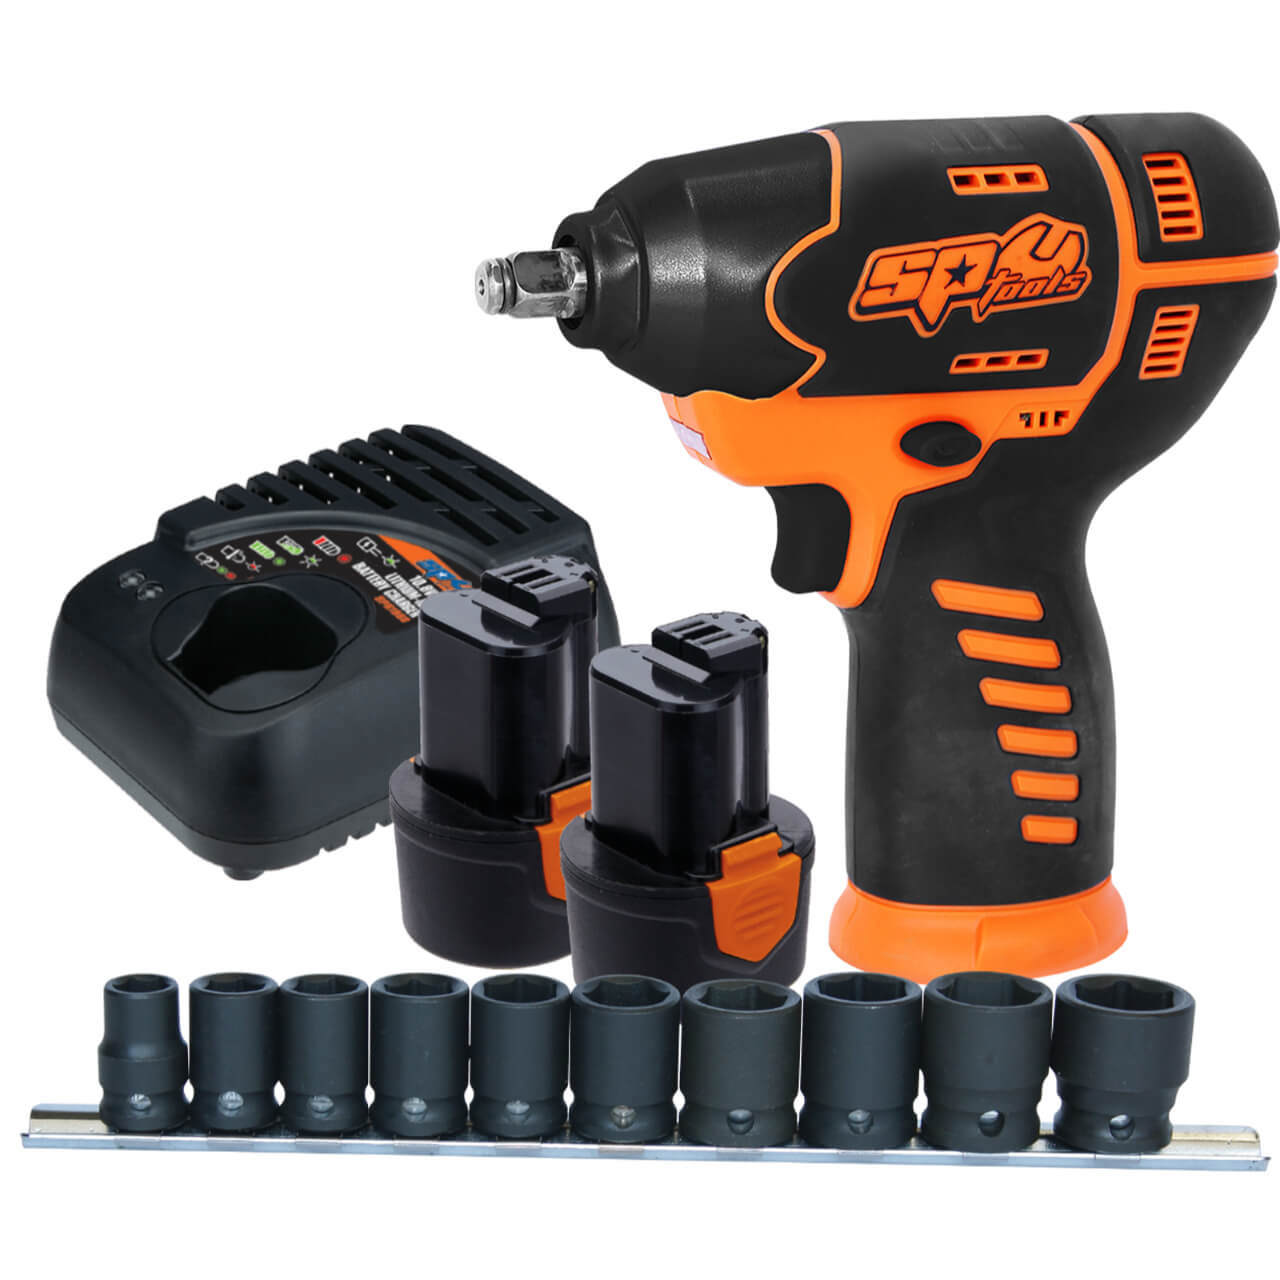 SP Tools 12v 3/8 Dr Mini Impact Wrench with Socket Rail